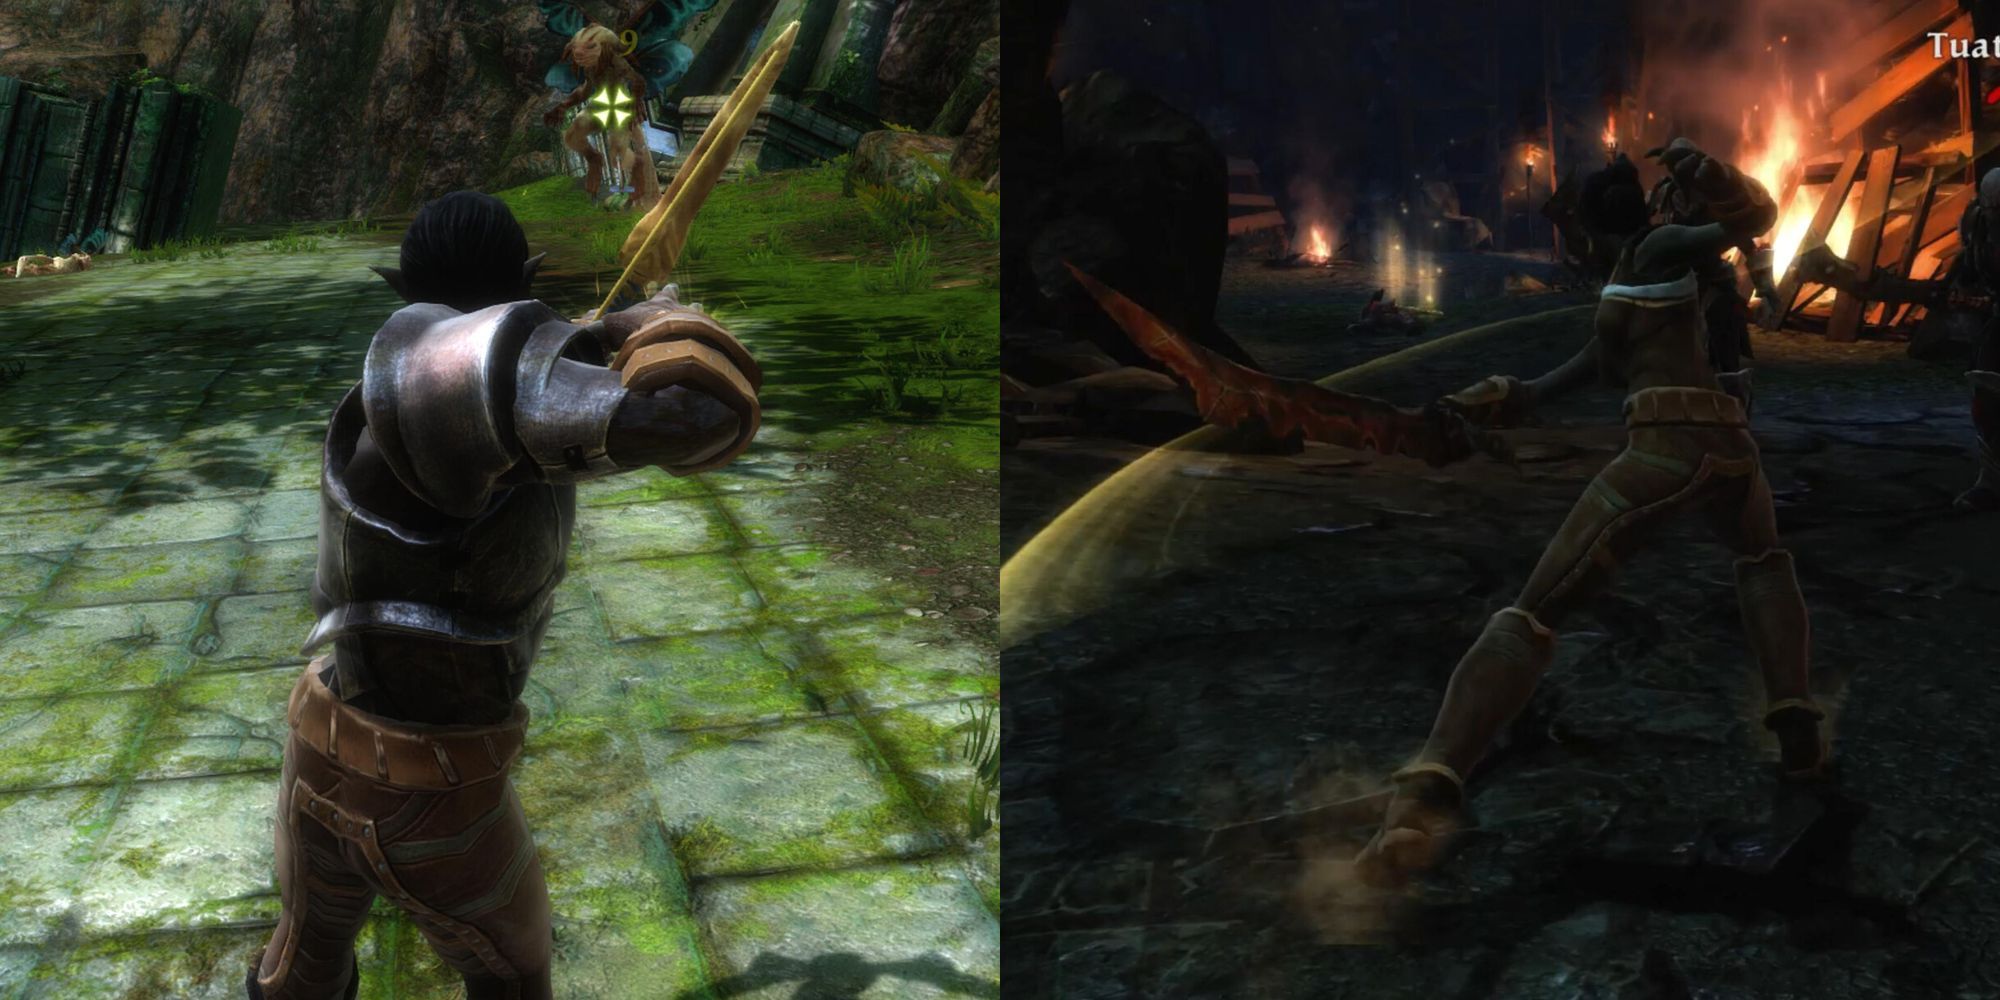 Kingdoms of Amalur weapon class. Firing a bow at mid-range, attacking an enemy.